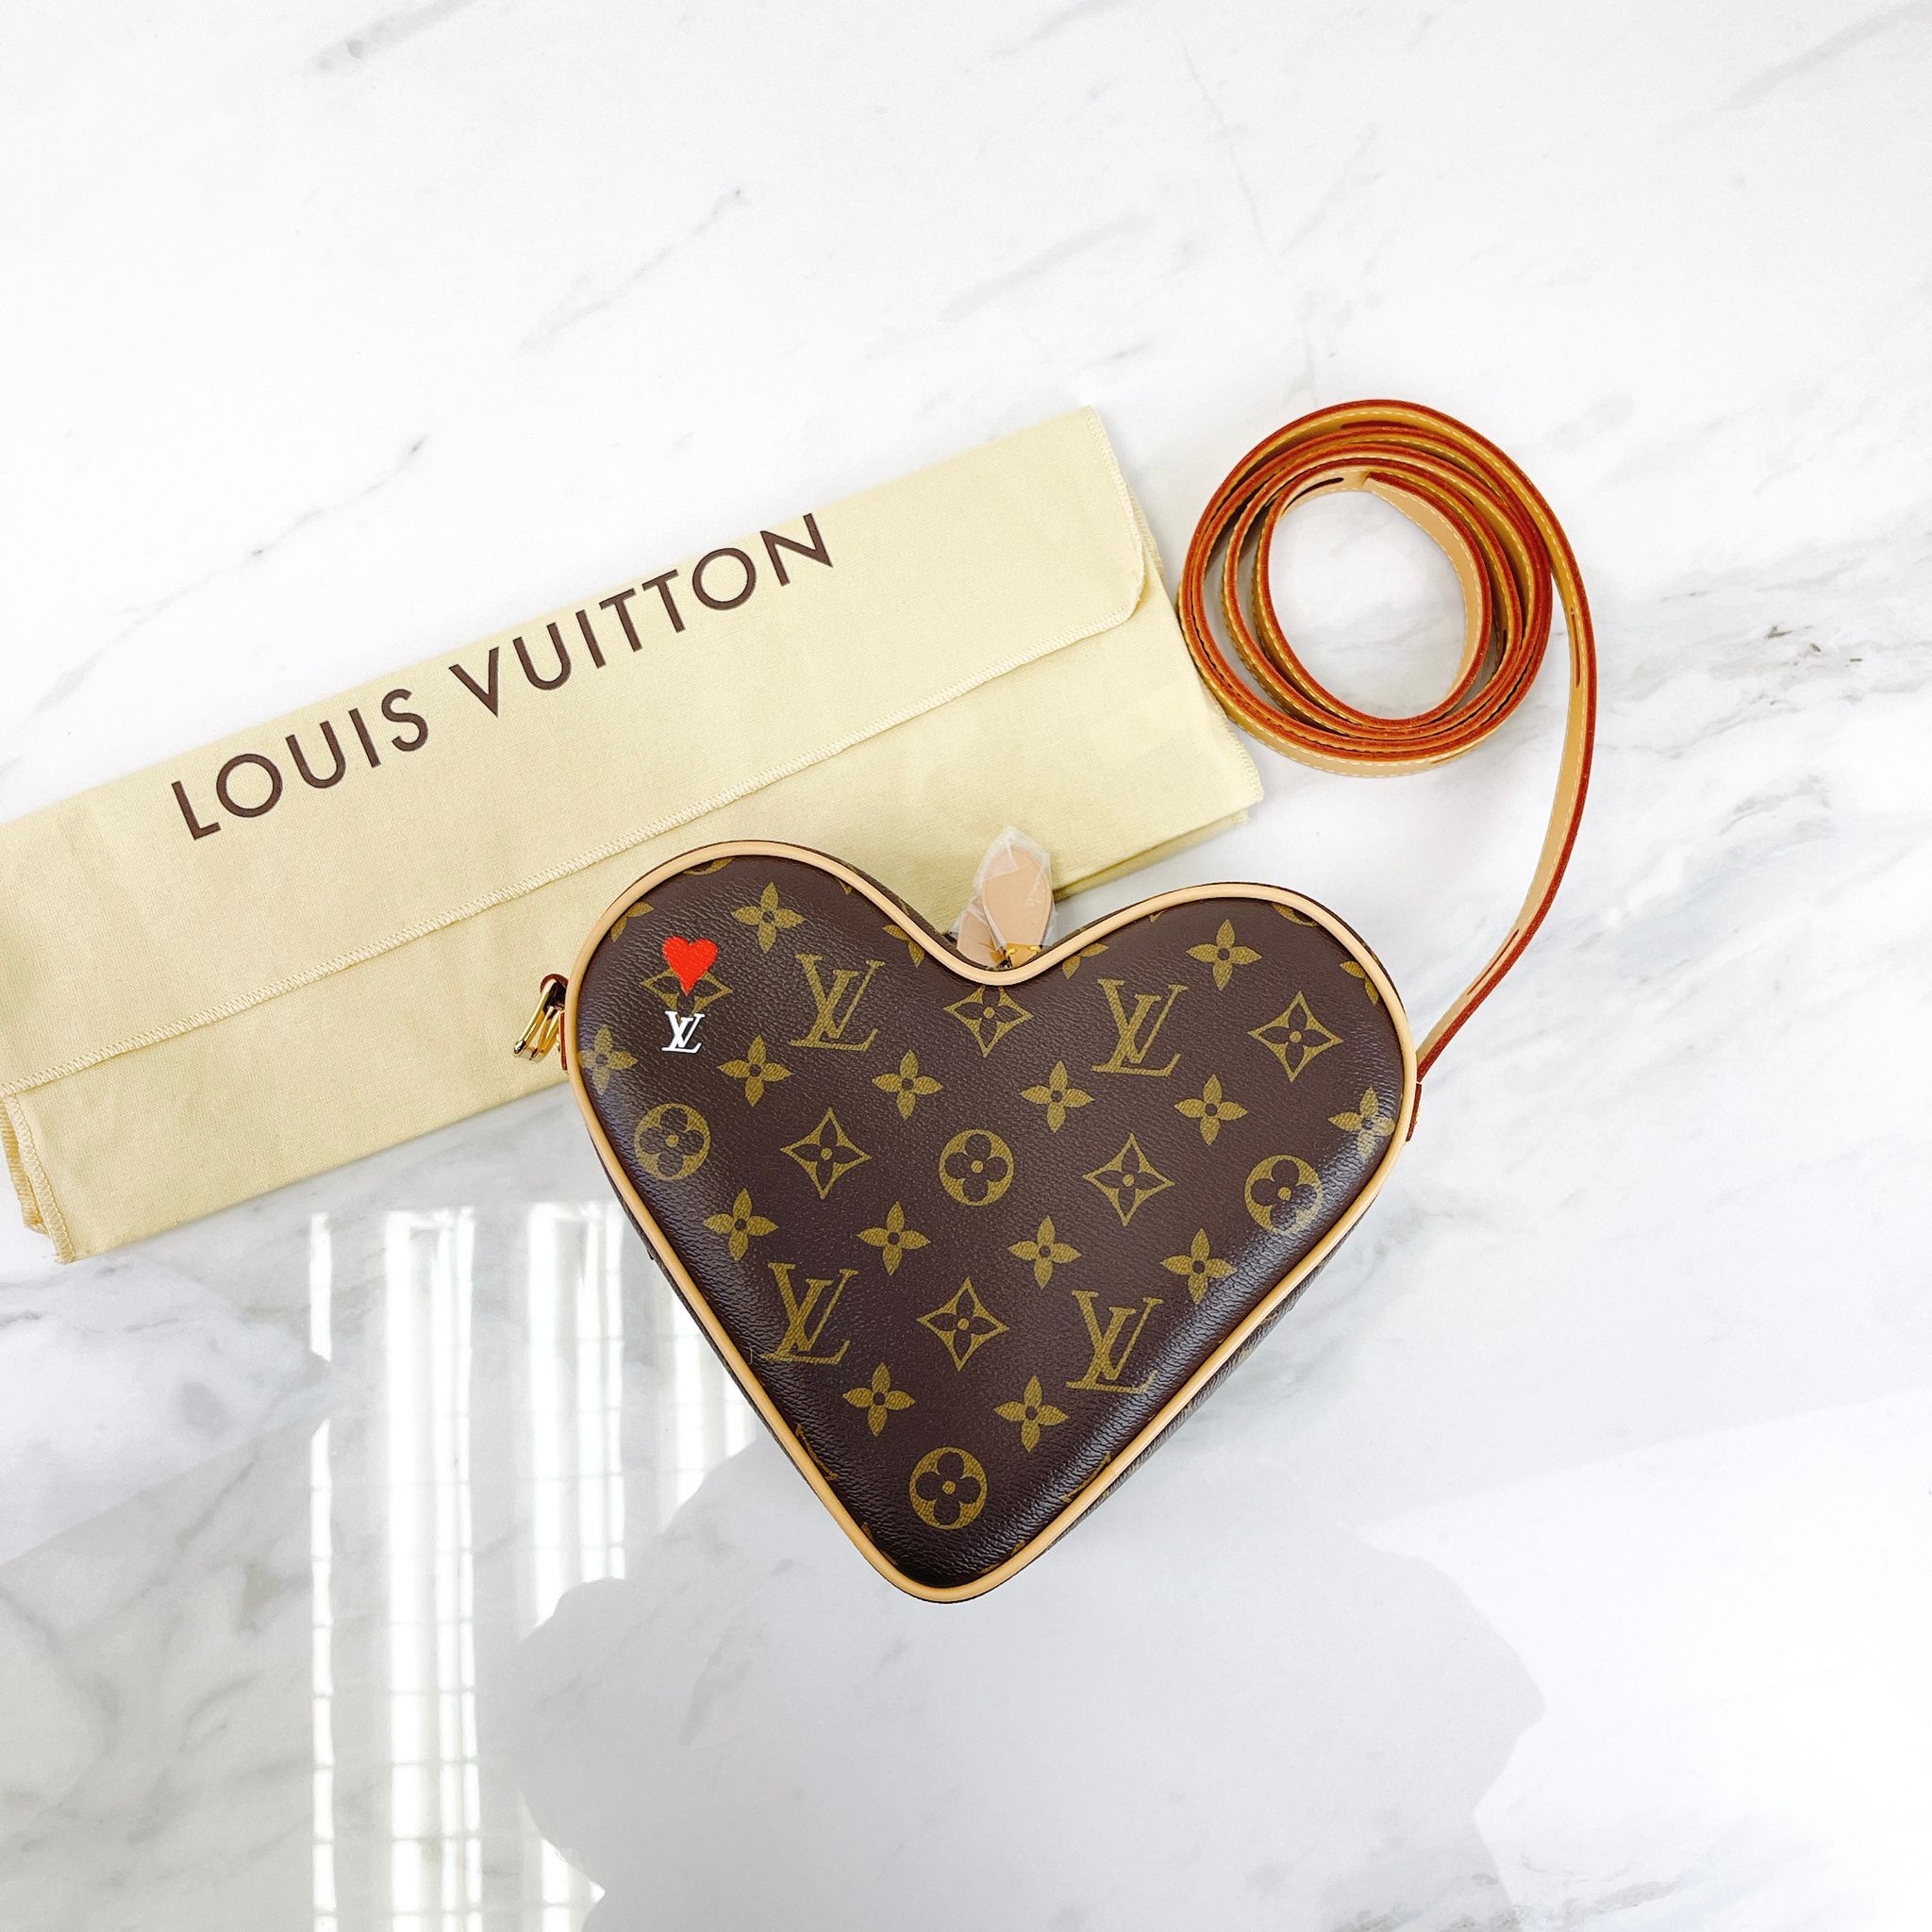 What fits in my LV heart bag 🥰 #lv #lvheartbag #lvlover #louisvuitto